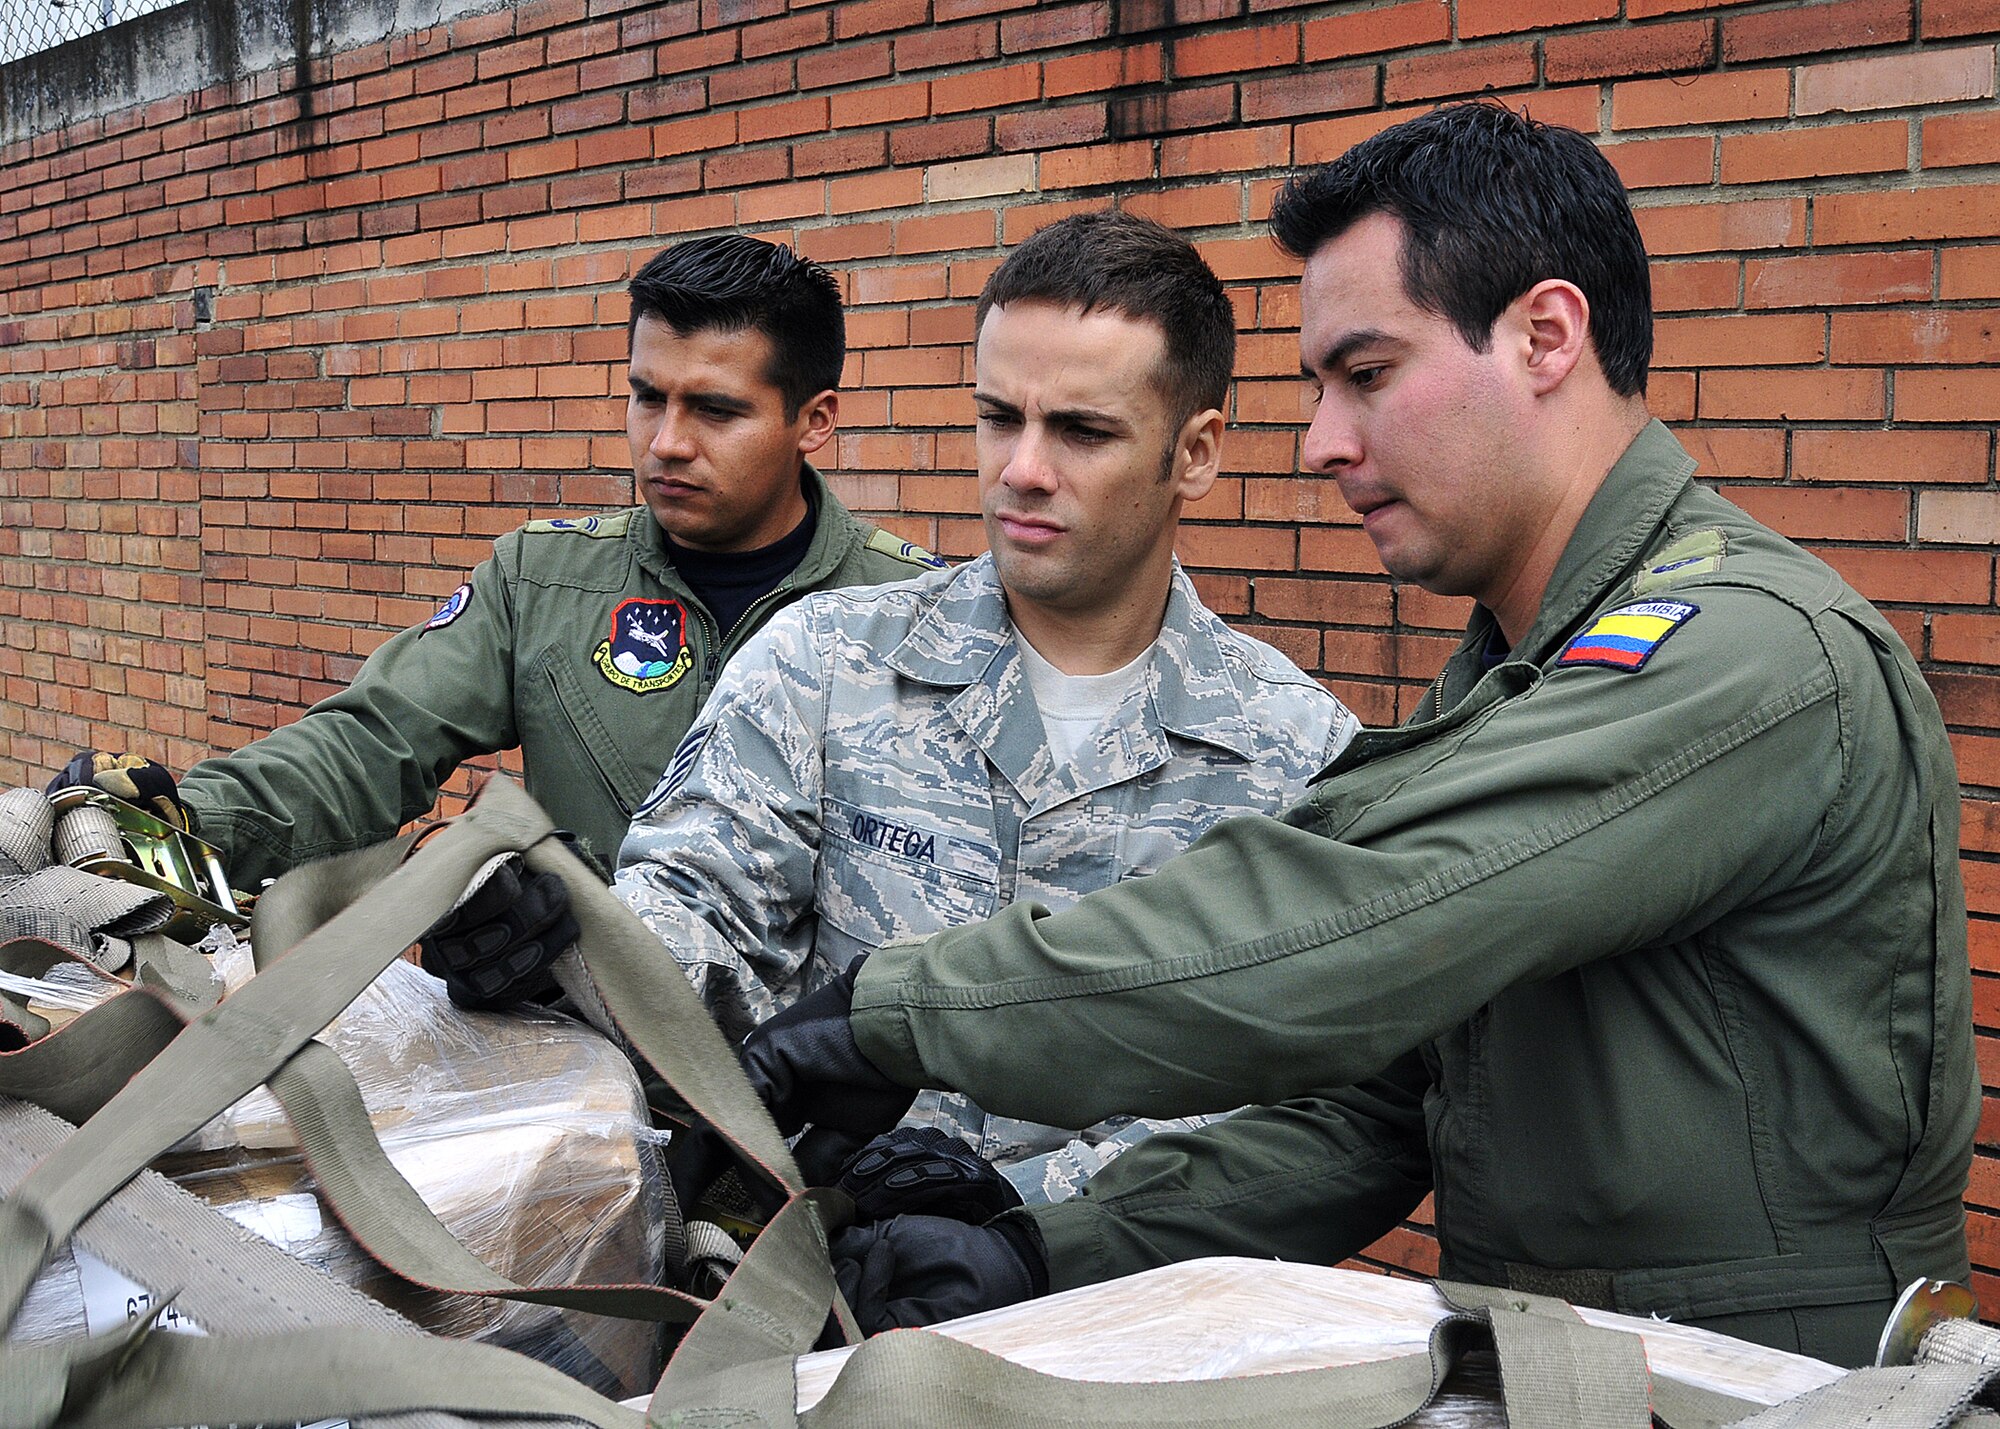 Staff Sgt. Angel Ortega, 571st Mobility Support Advisory Squadron air transportation air advisor, works with Técnico Cuarto Yefferson Oviedo and Tecnico Cuarto Cesar Gomez, Colombian air force members, on properly securing cargo during the pallet build-up seminar June 6 at Commando Aéreo de Transporte Militar, Bogota, Colombia.  (U.S. Air Force photo by Tech. Sgt. Lesley Waters)